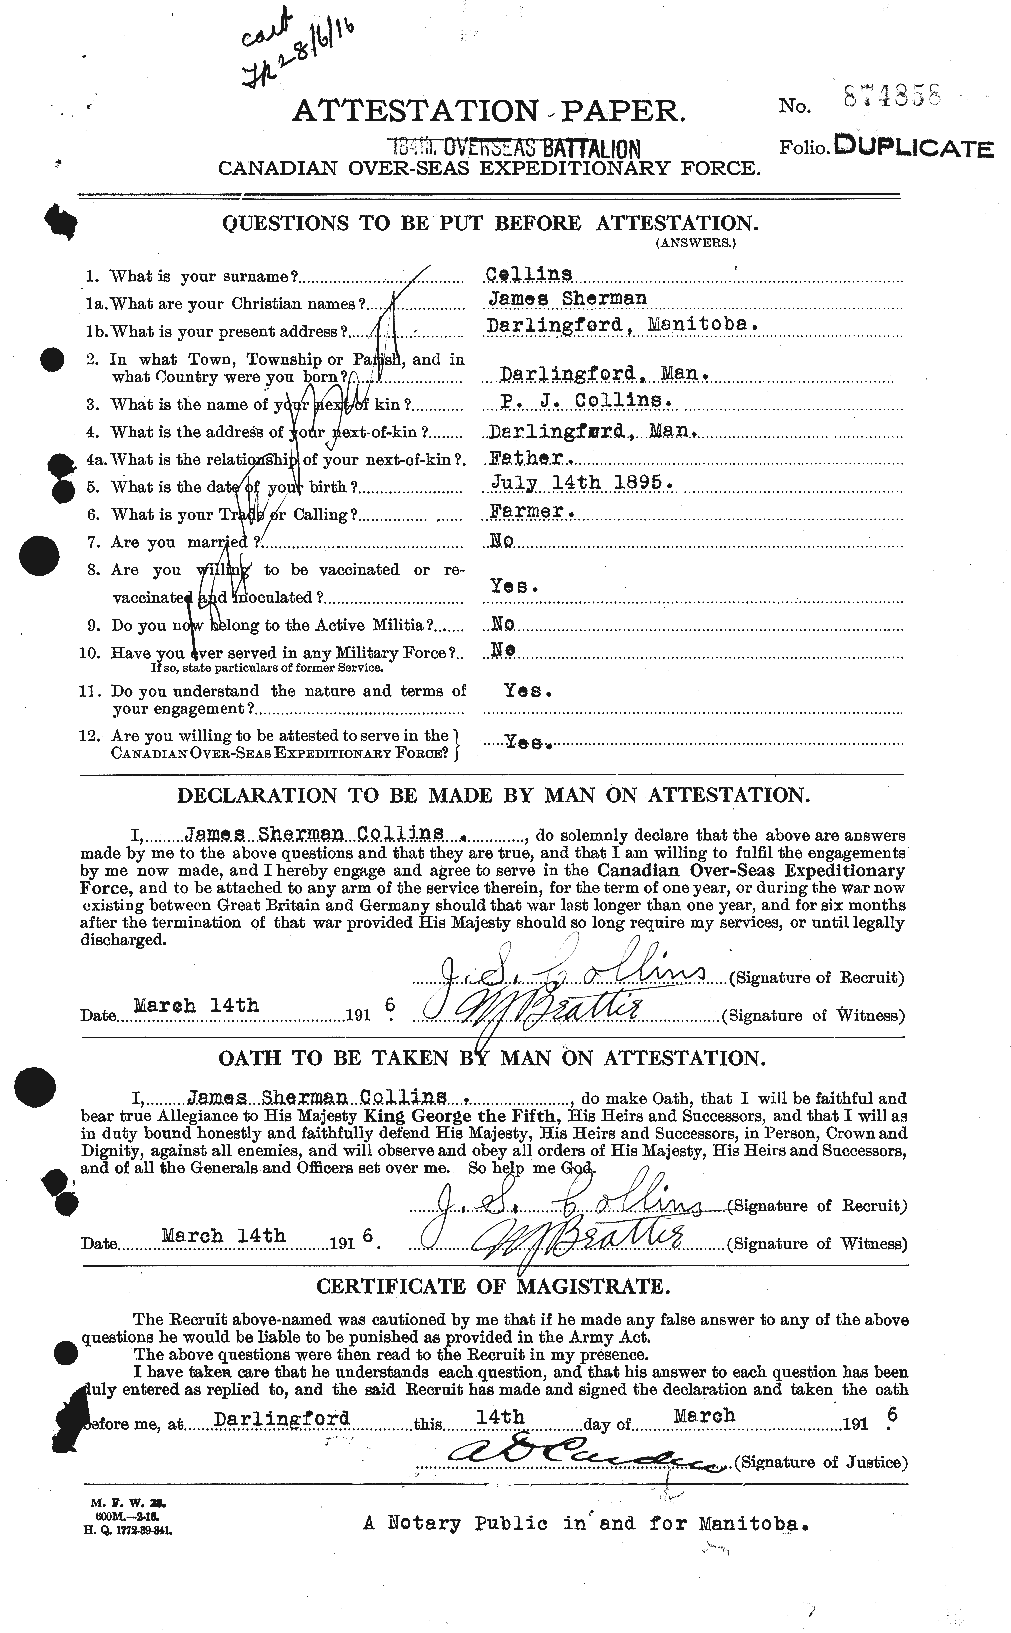 Personnel Records of the First World War - CEF 069938a